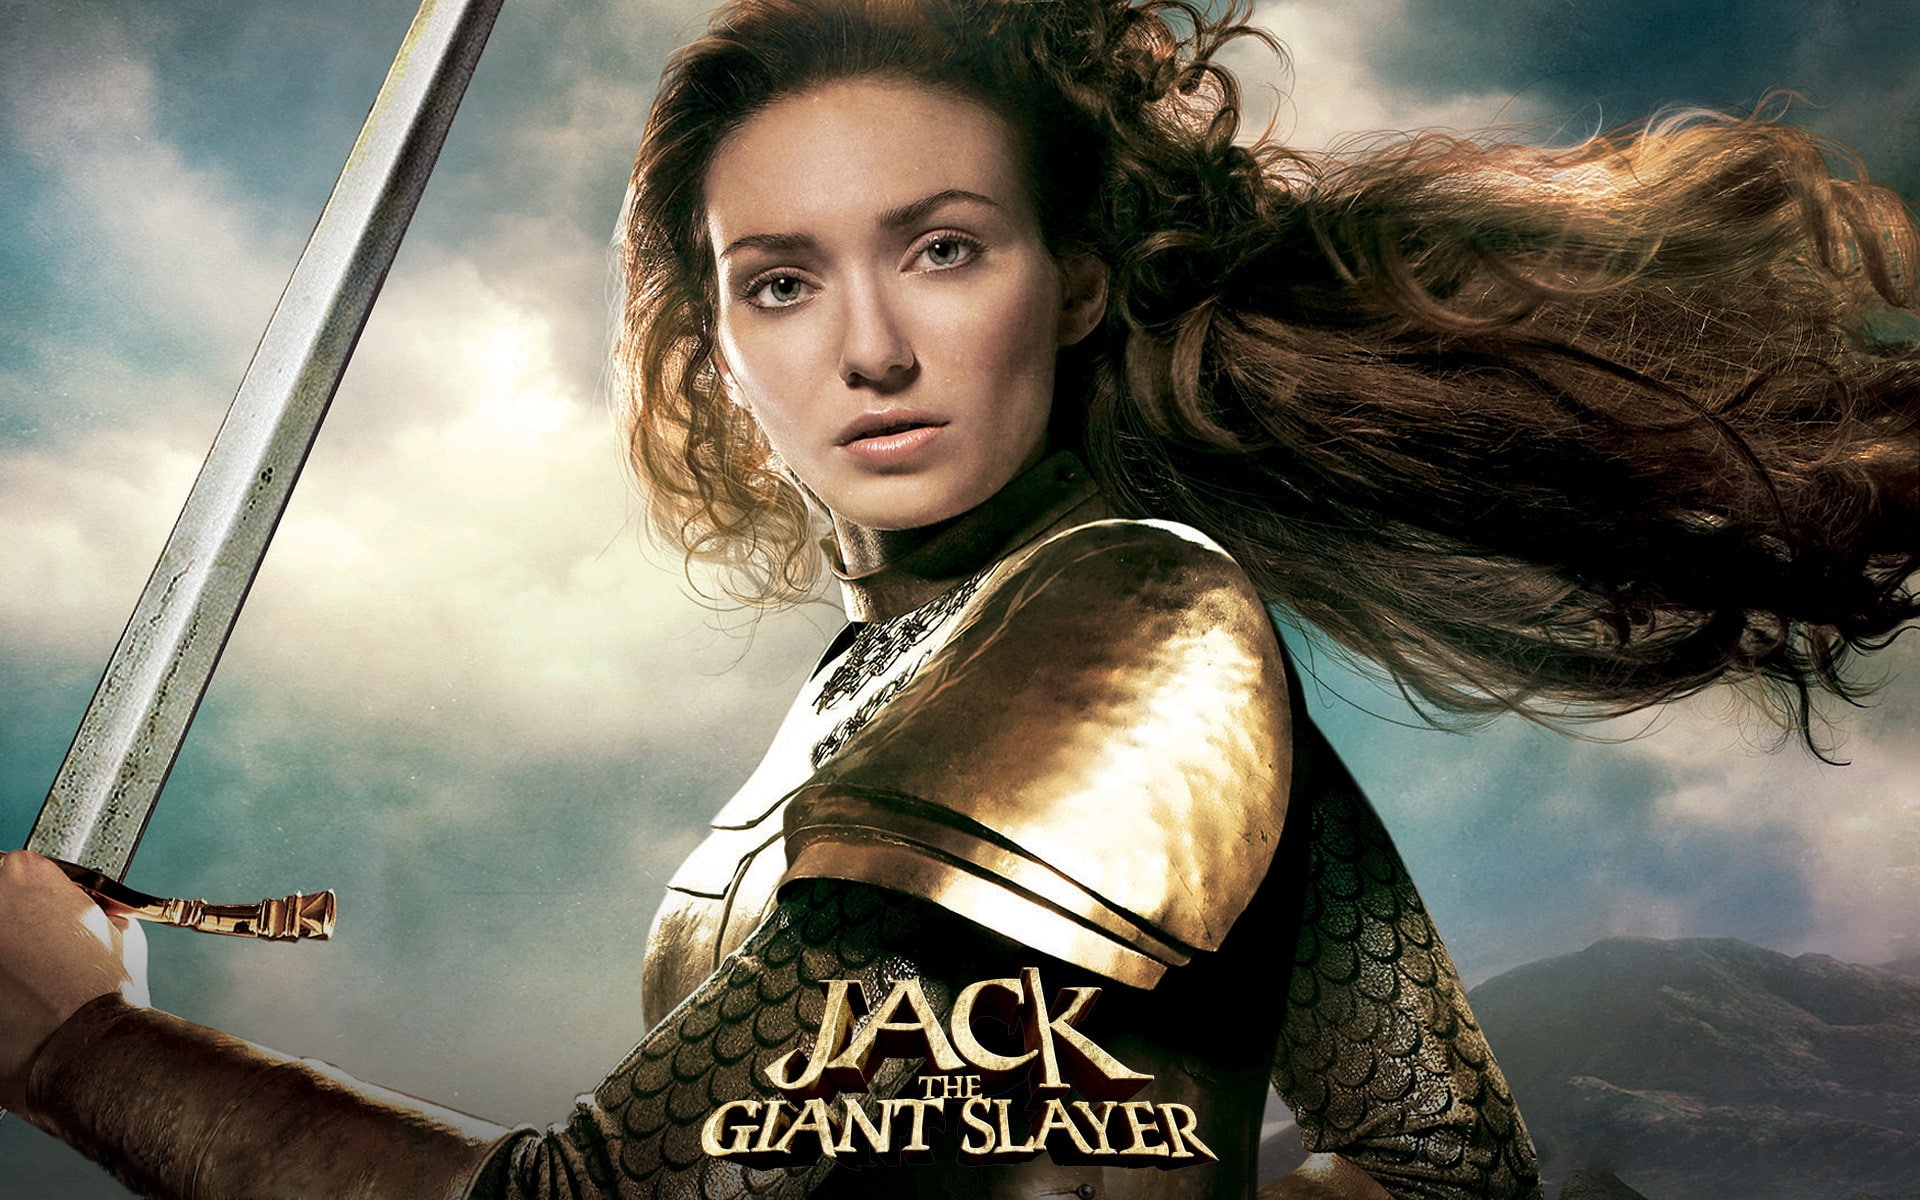 Eleanor Tomlinson in Jack the Giant Slayer, jack the giant slayer poster